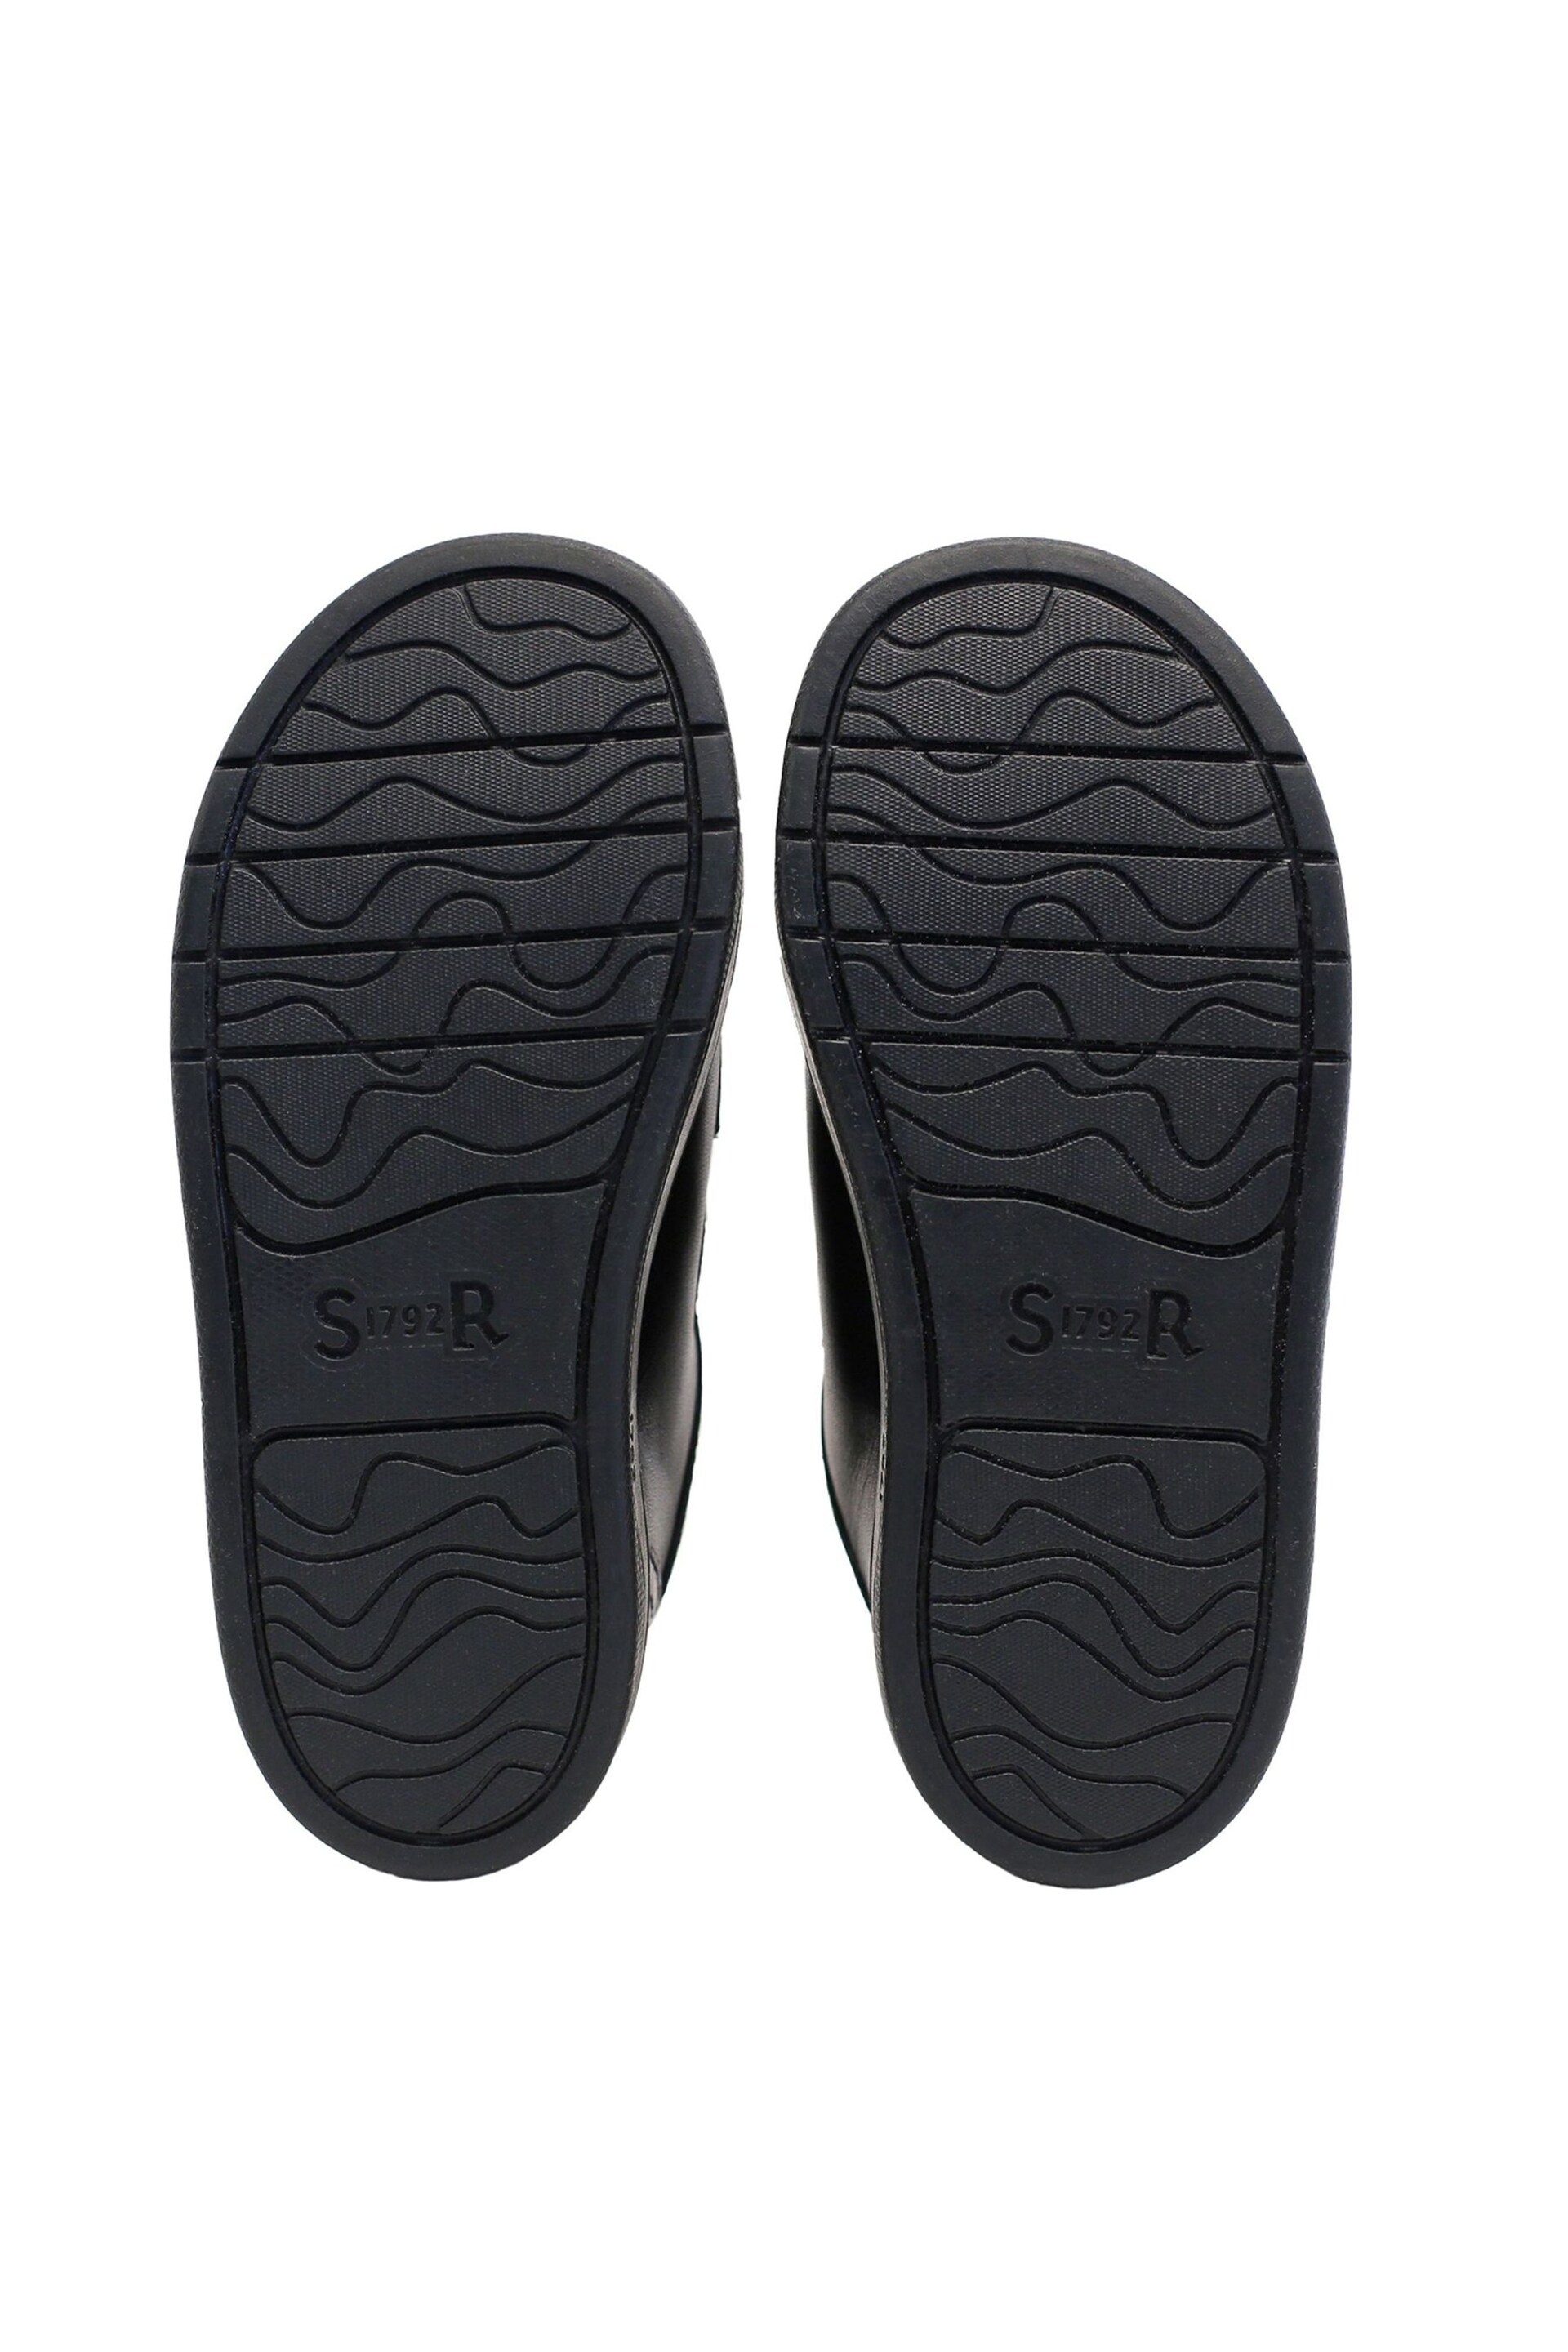 Start-Rite Explore Rip-Tape Black Leather Comfy School Shoes F Fit - Image 7 of 7